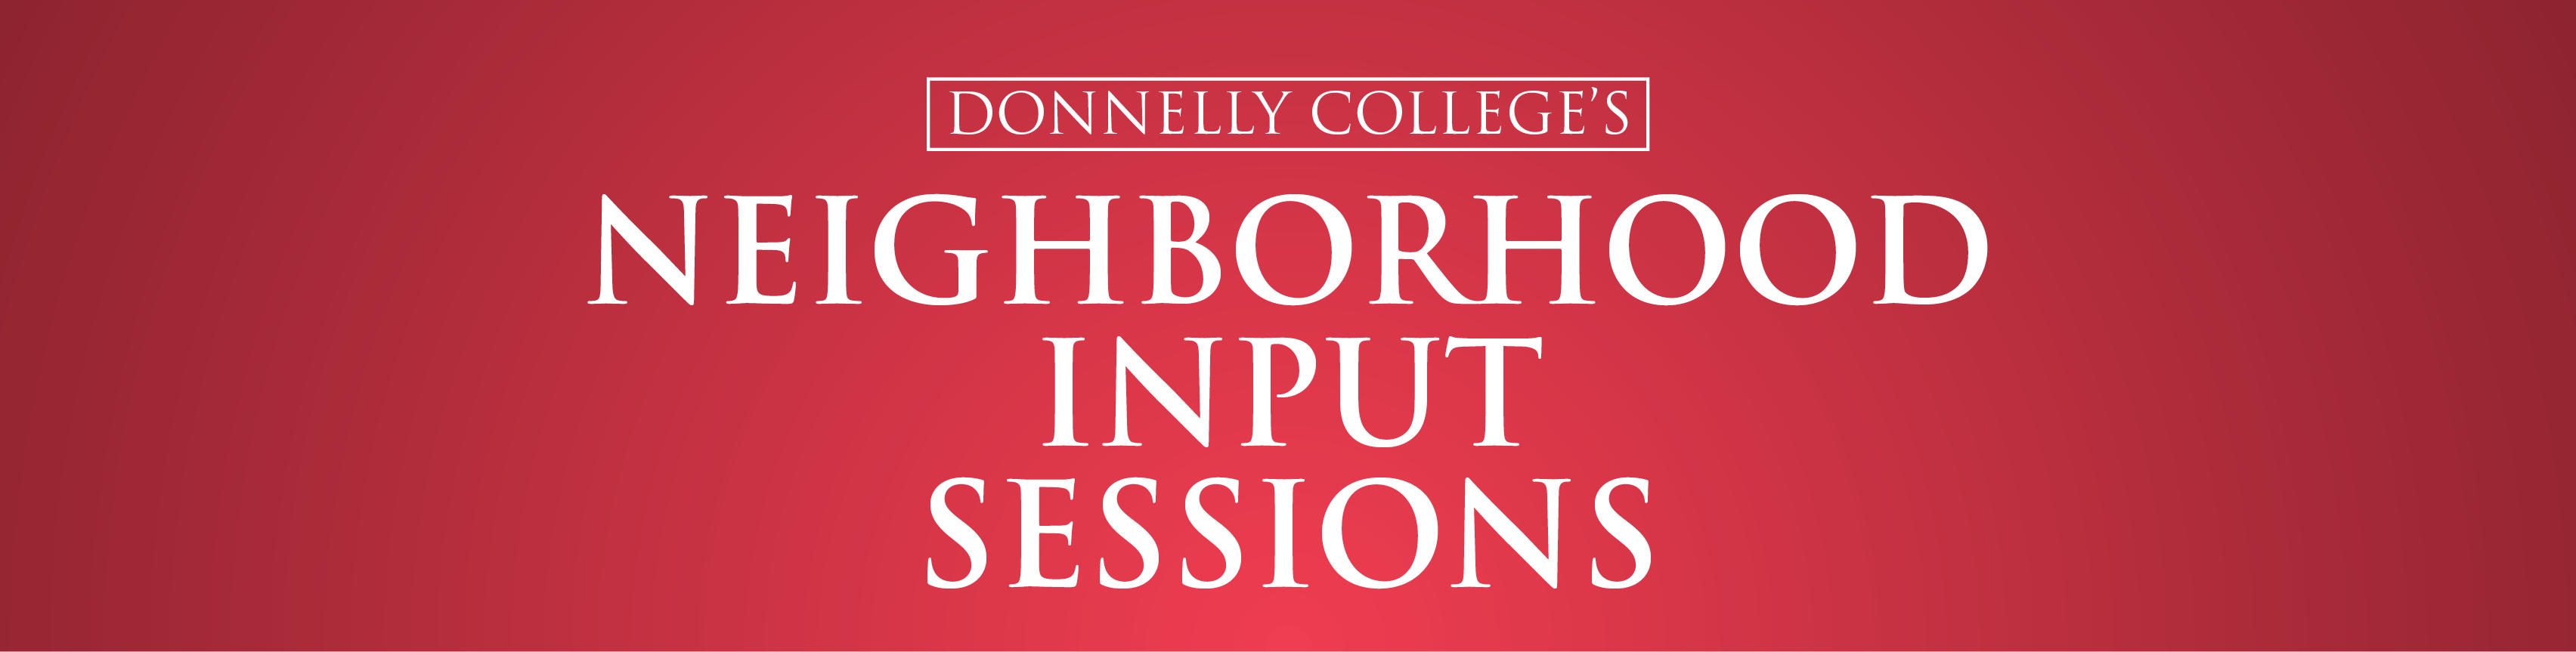 Donnelly College's Neighborhood Input Sessions